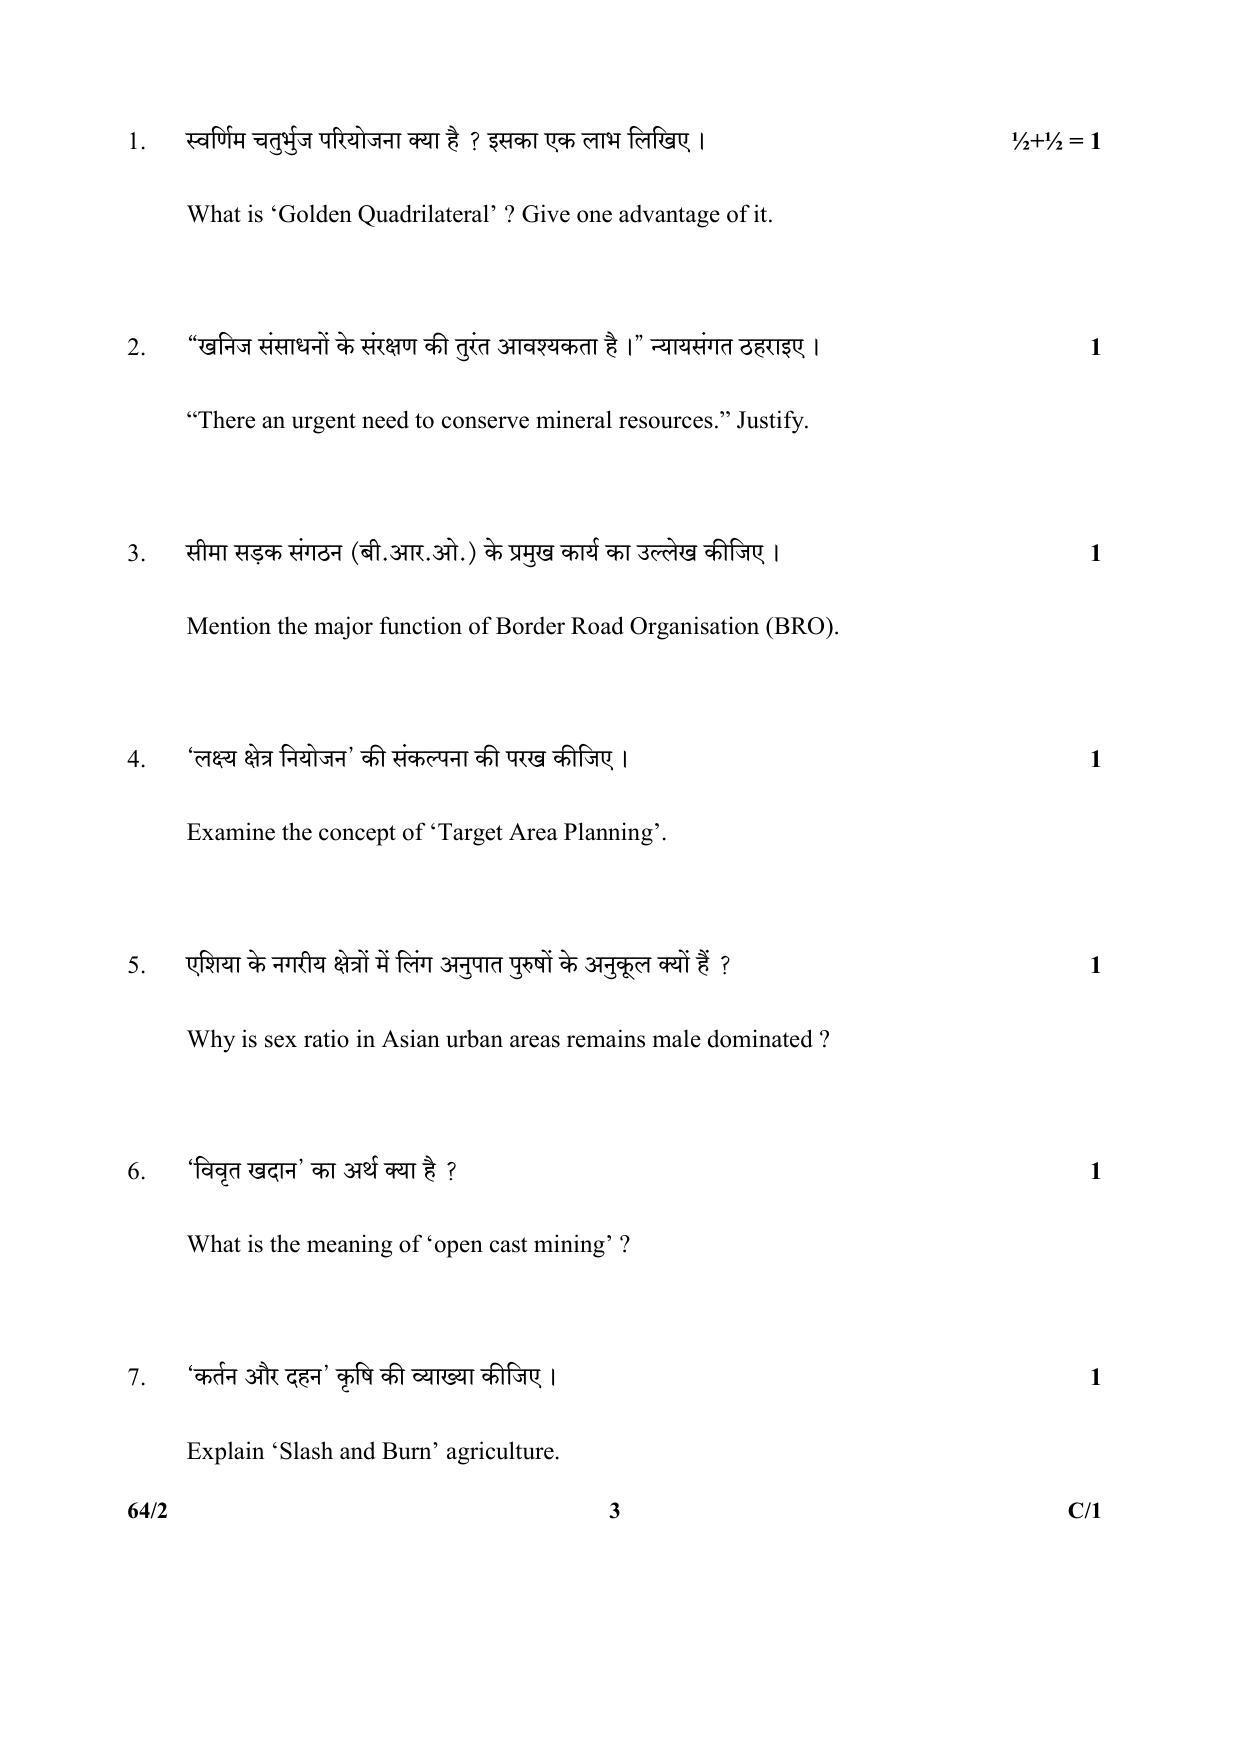 CBSE Class 12 64-2 (Geography) 2018 Compartment Question Paper - Page 3